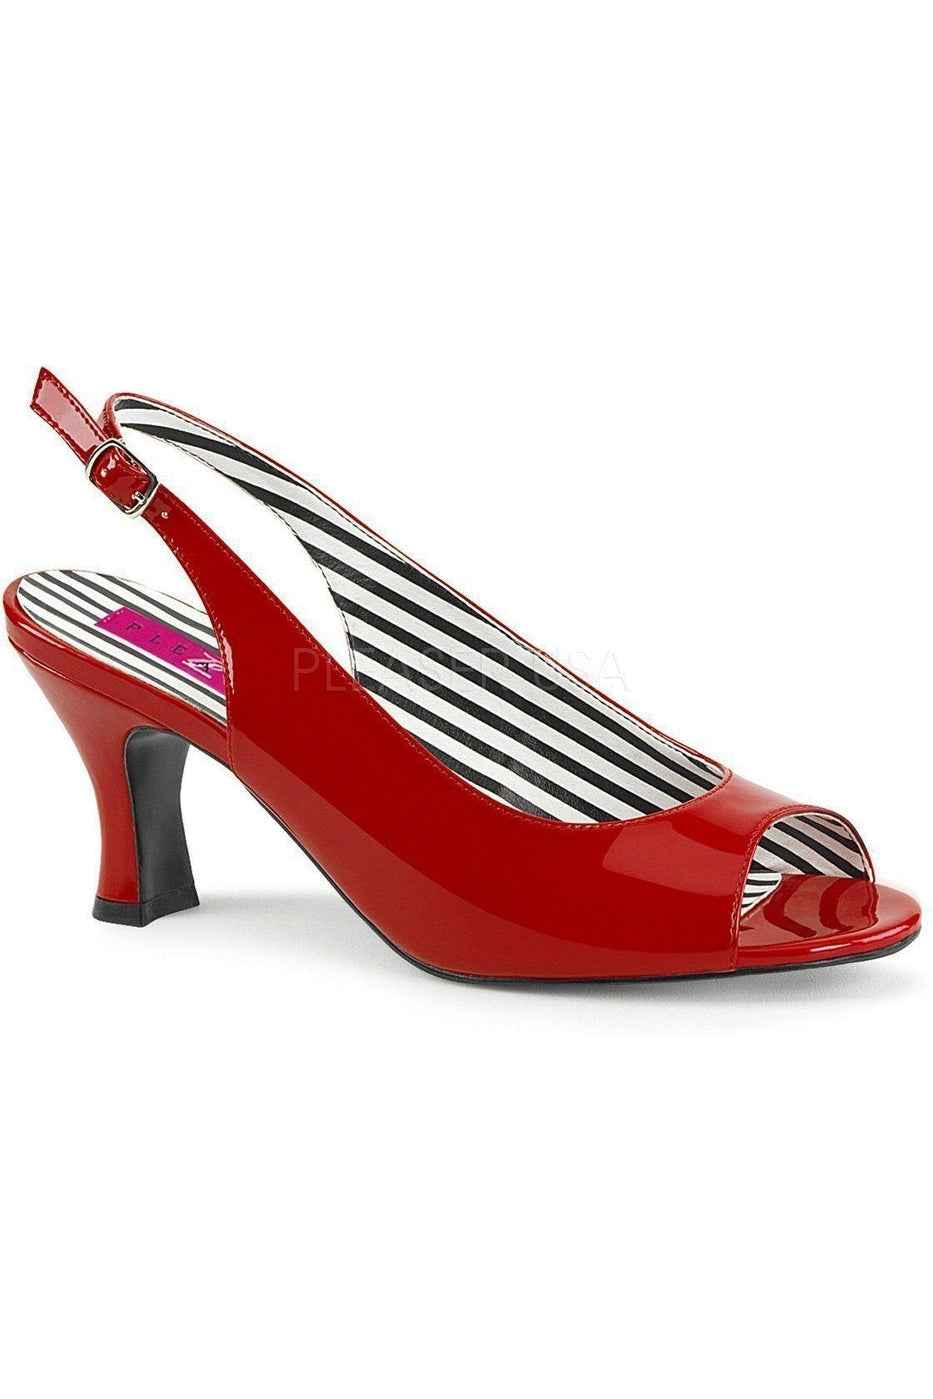 JENNA-02 Pump | Red Patent-Pleaser Pink Label-Red-Pumps-SEXYSHOES.COM